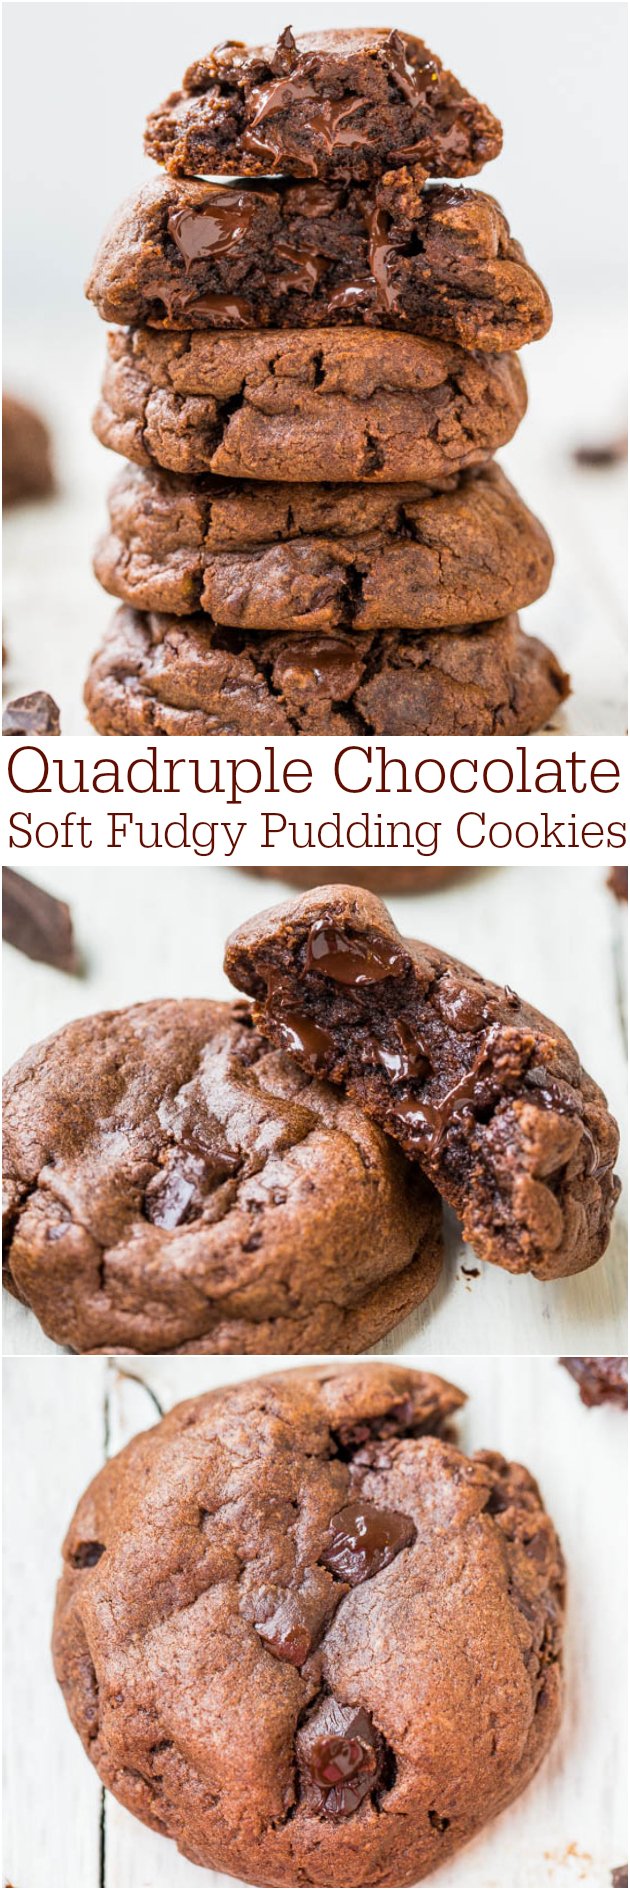 A stack of rich, quadruple chocolate soft fudgy pudding cookies with melty chocolate chips.